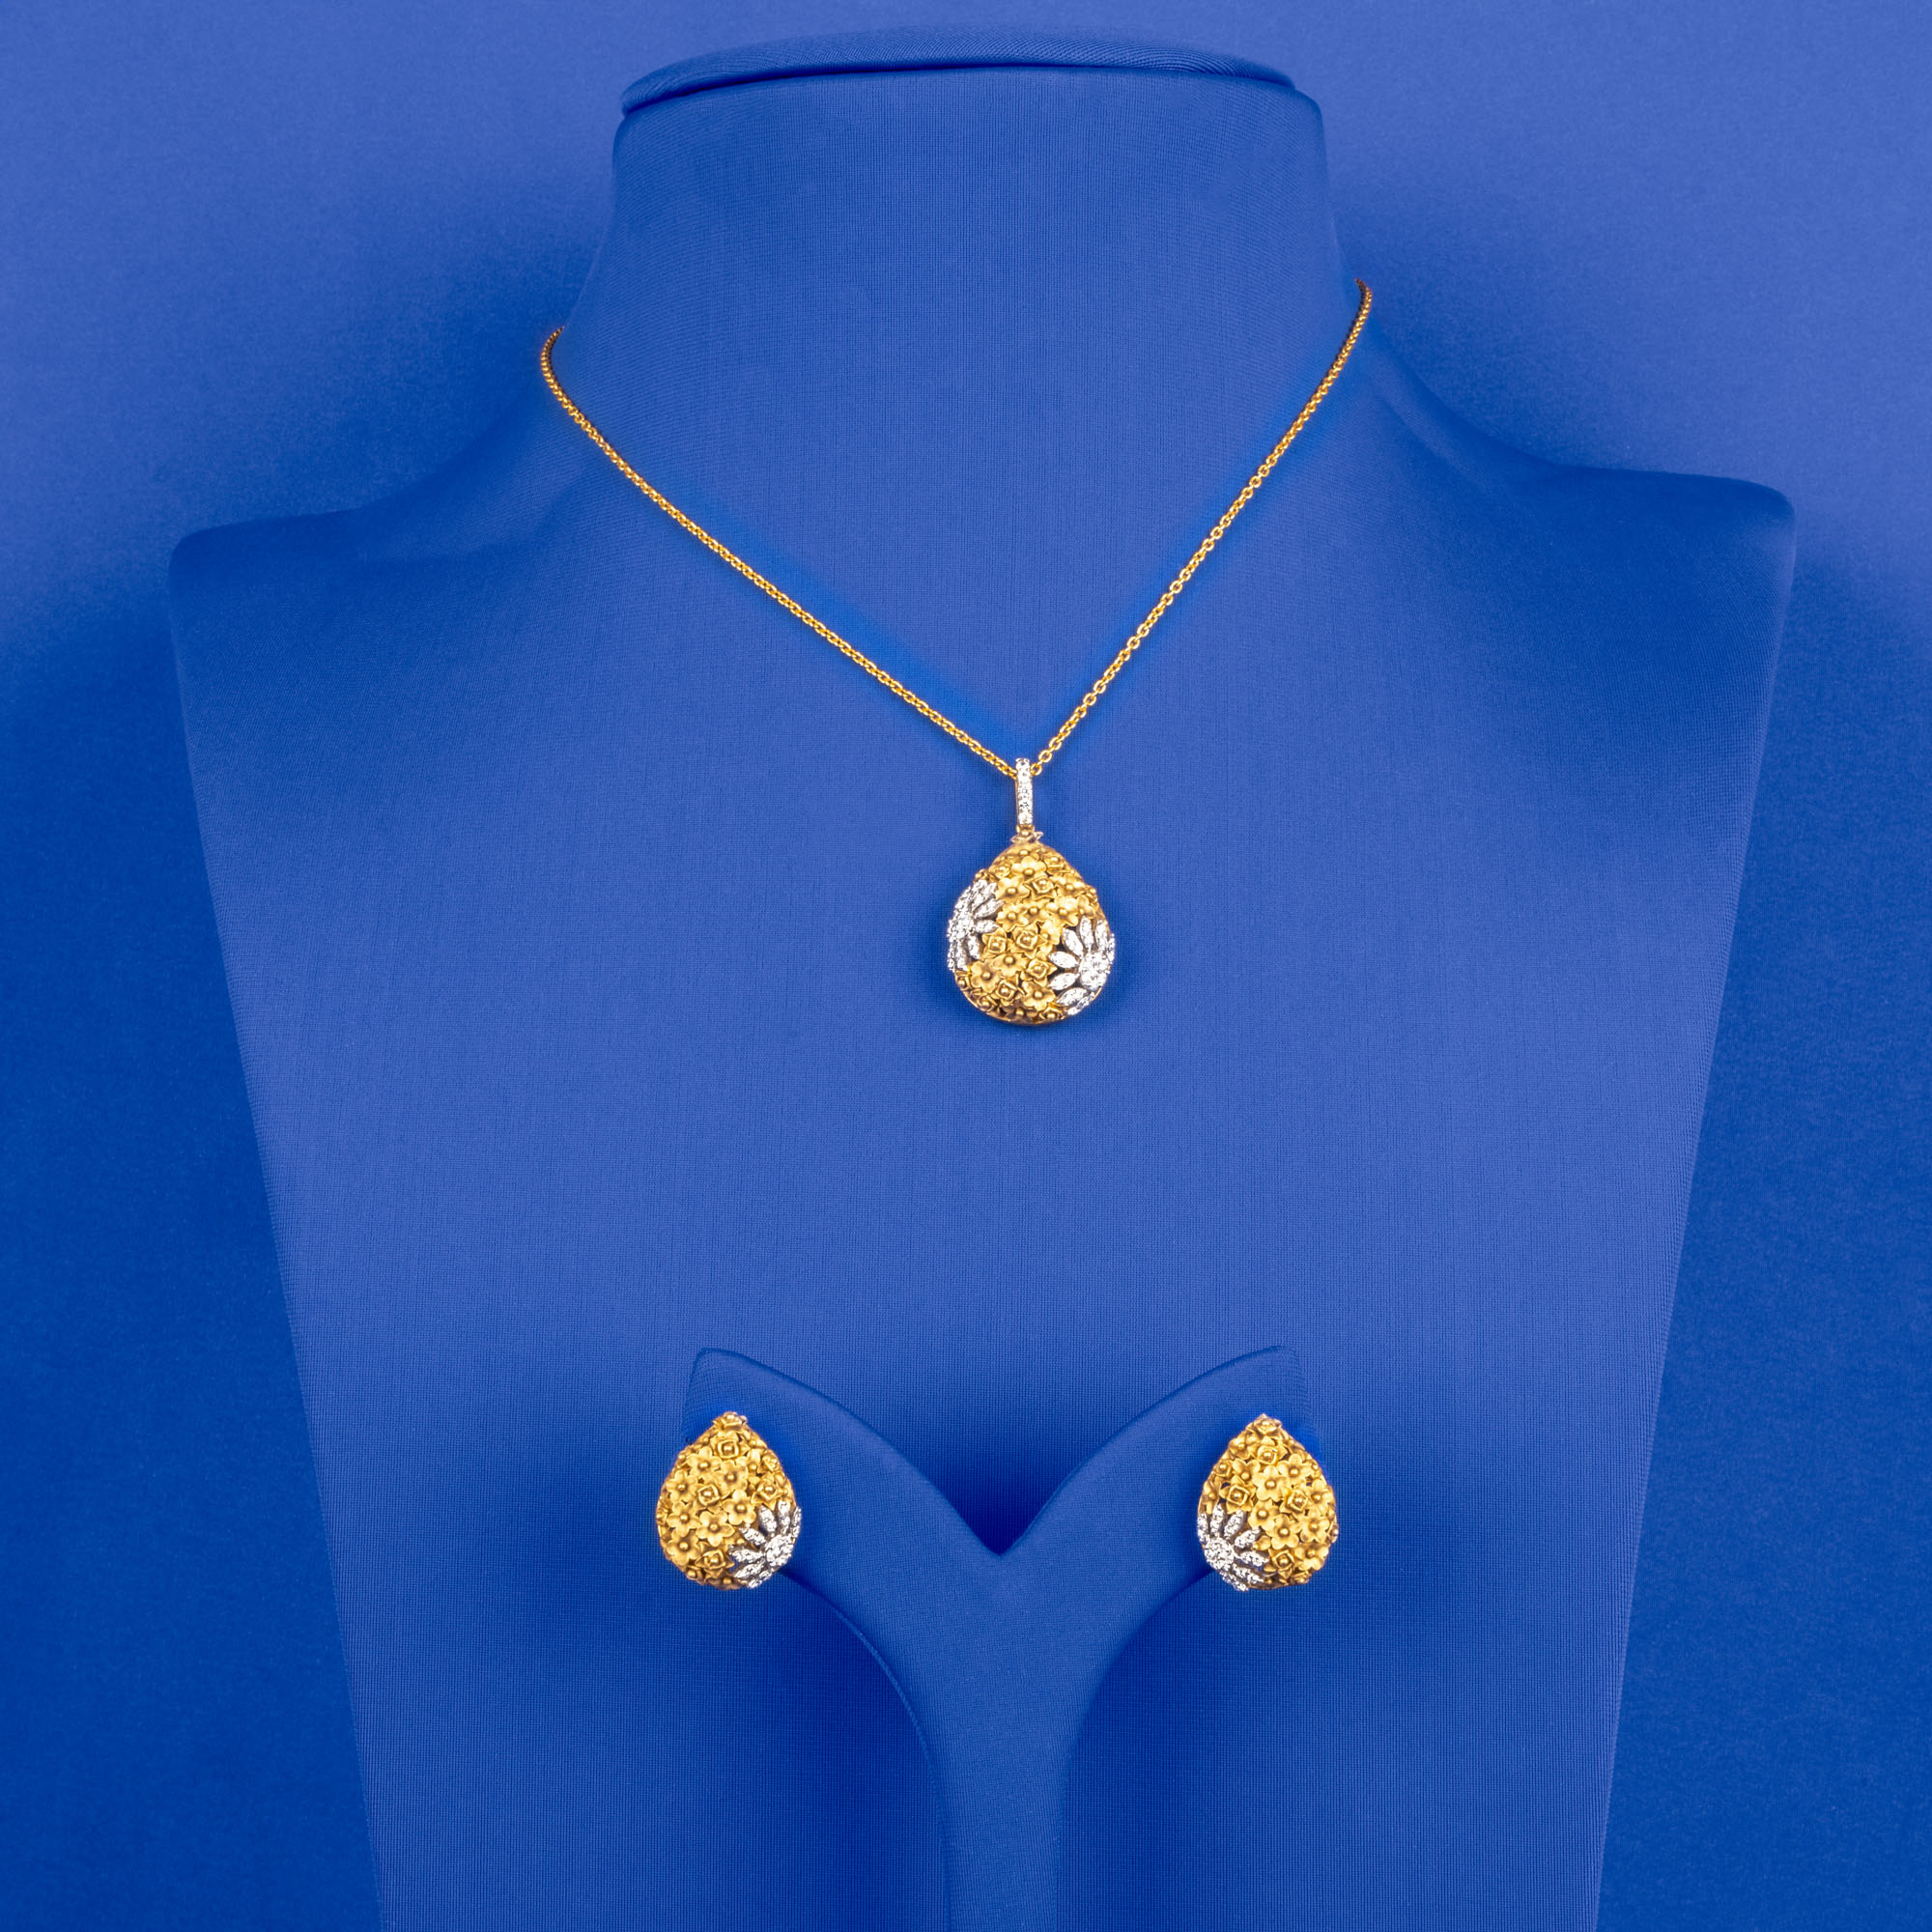 Enchanted Aura: Handmade 18k Yellow Gold Diamond Pendant and Earrings Set (Chain not included)